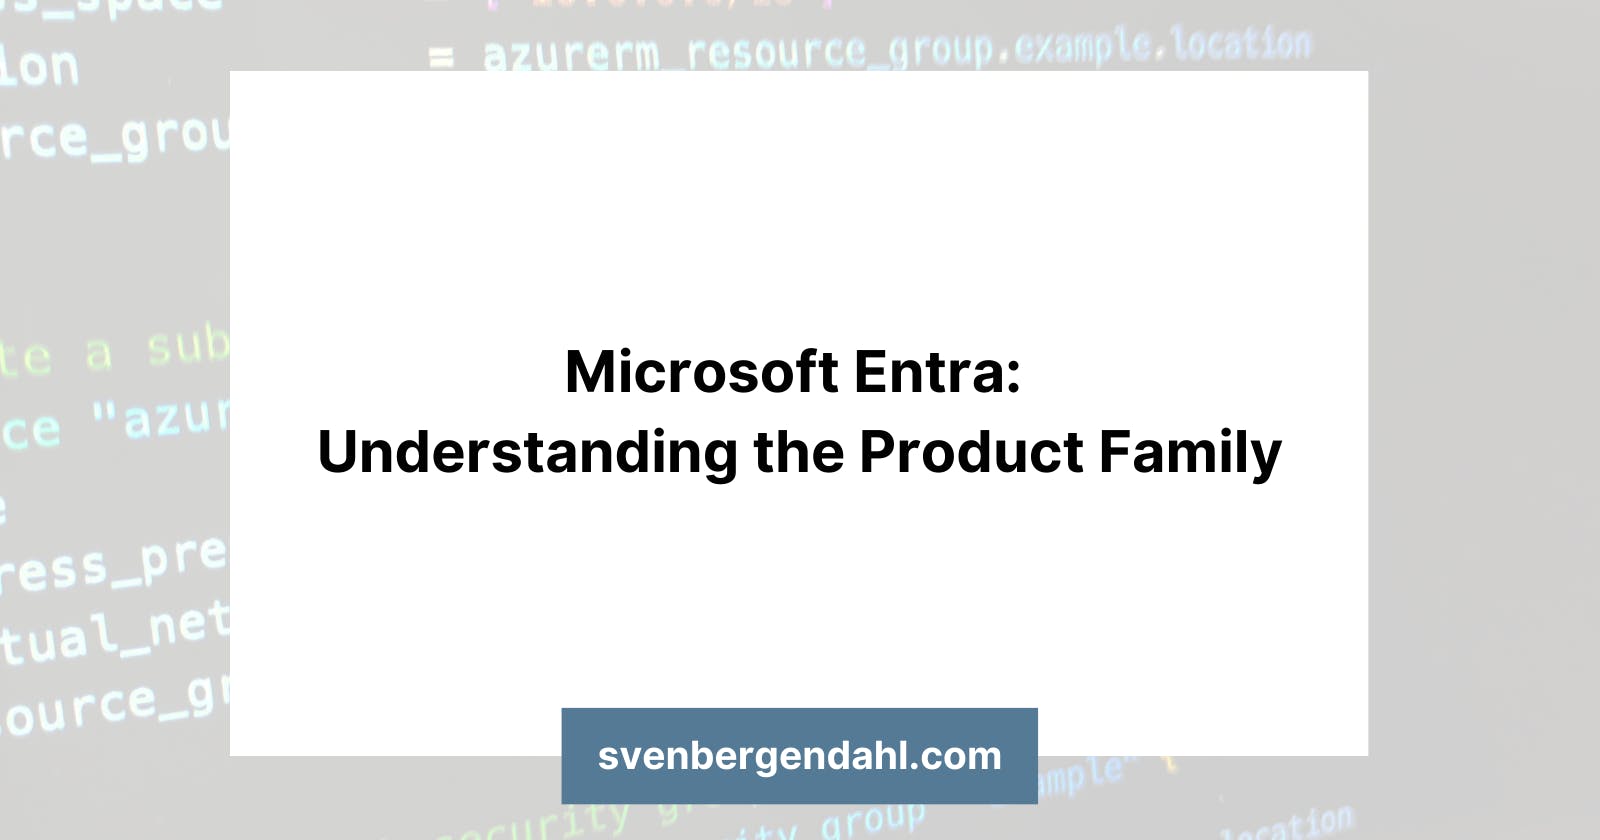 Microsoft Entra: Understanding the Product Family